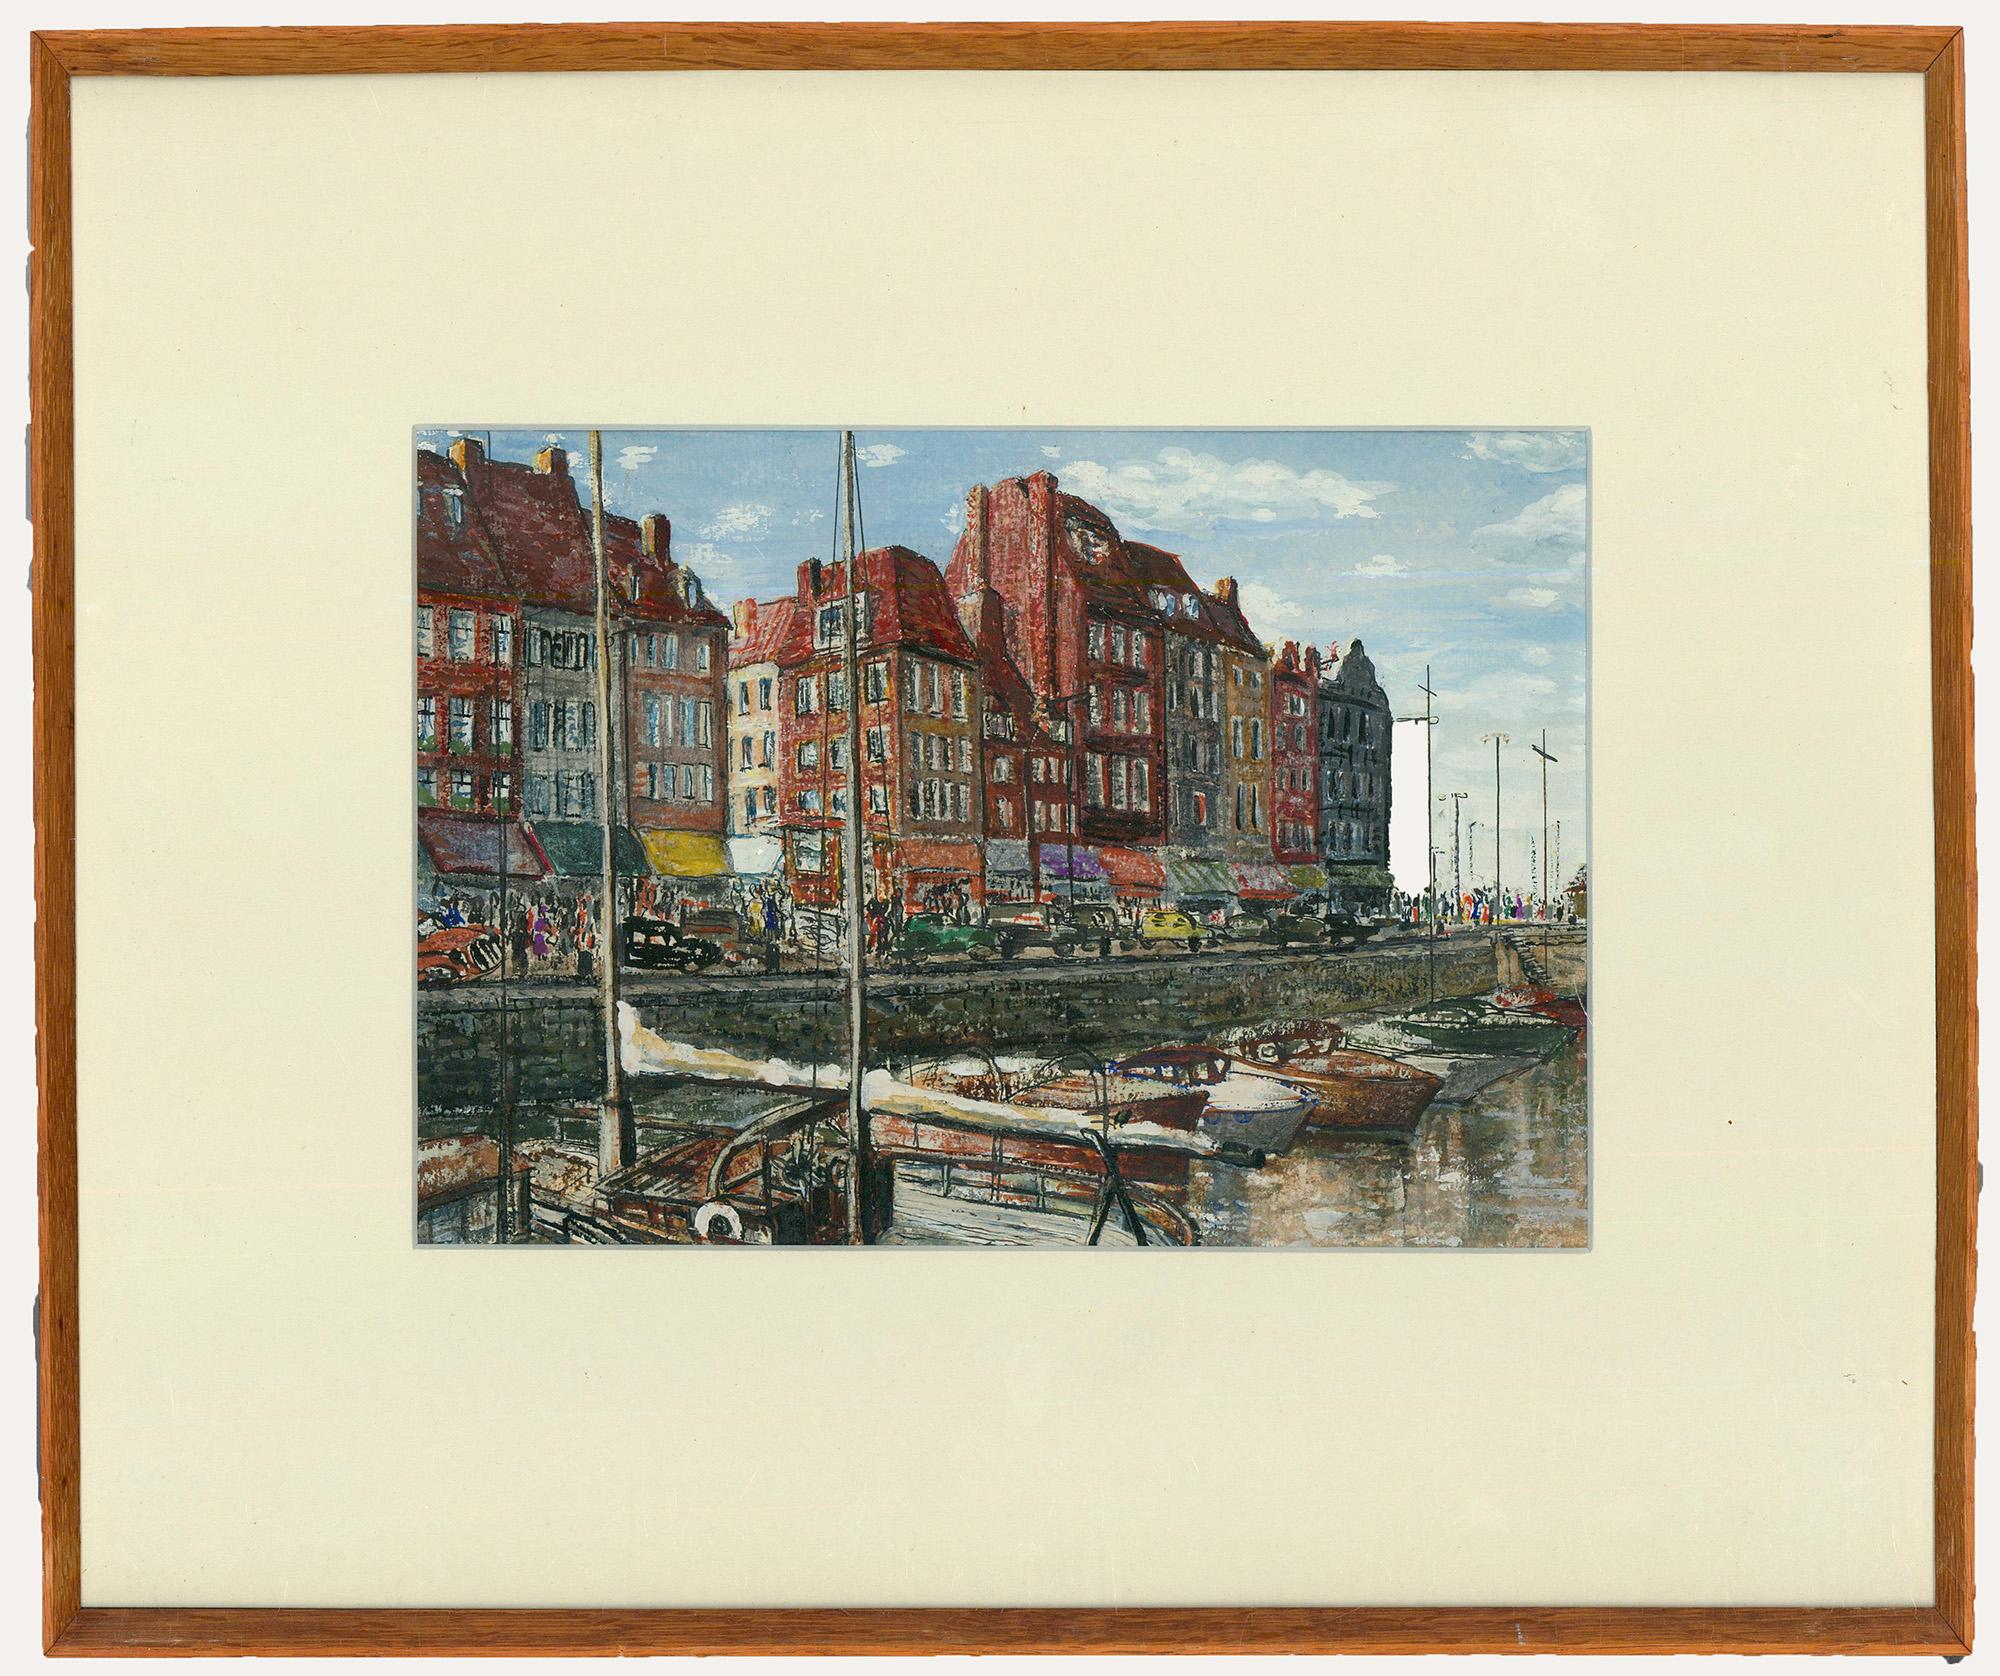 Sonia Poliakov - Framed Mid 20th Century Mixed Media, Ostend Harbour - Mixed Media Art by Unknown